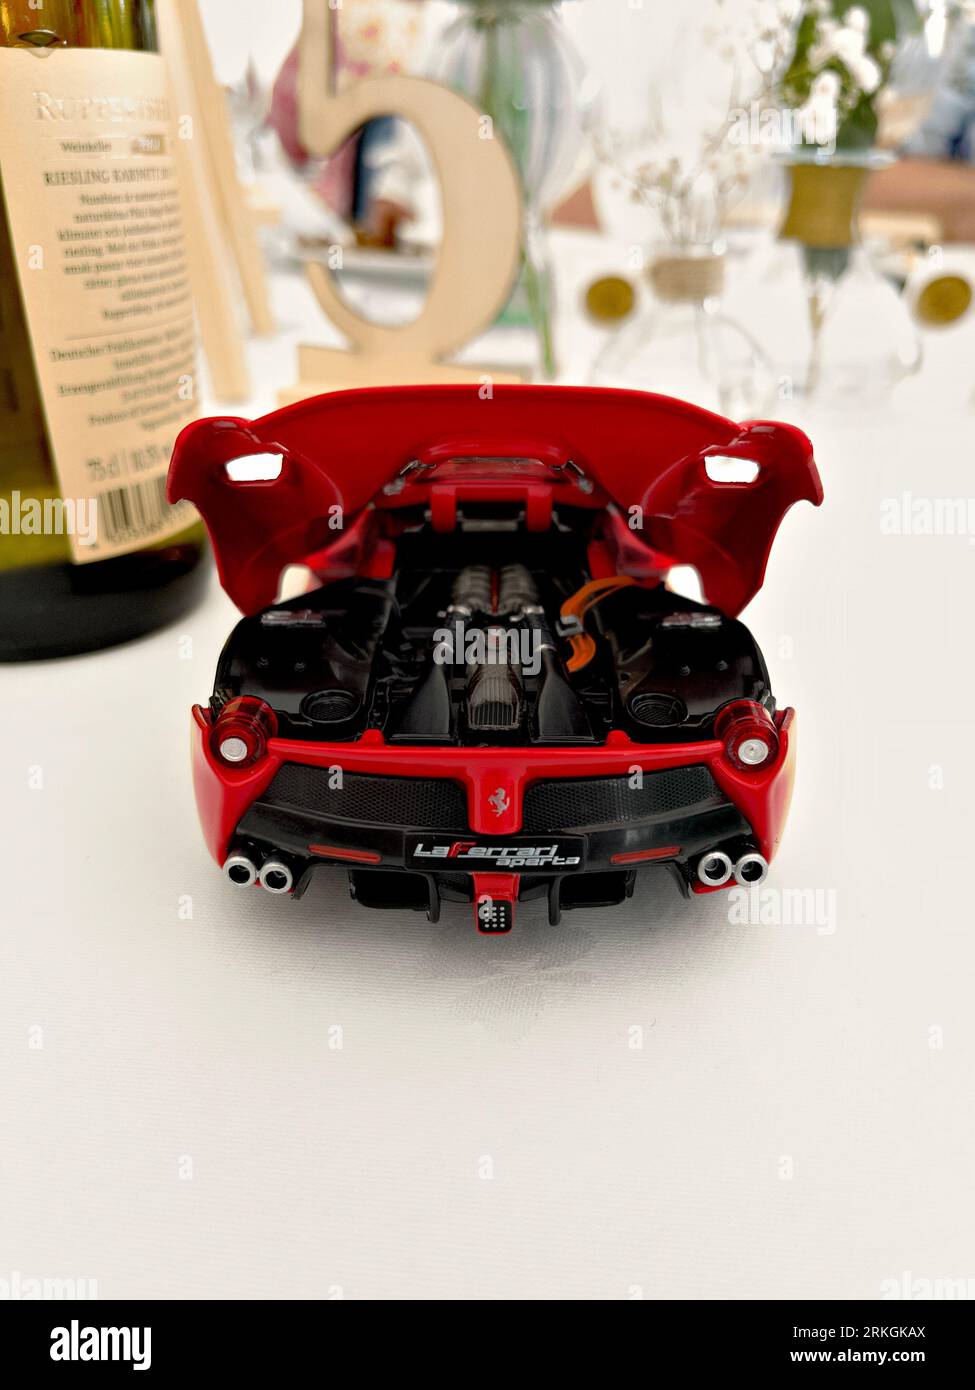 A vertical of a miniature red Ferrari model car on a table Stock Photo